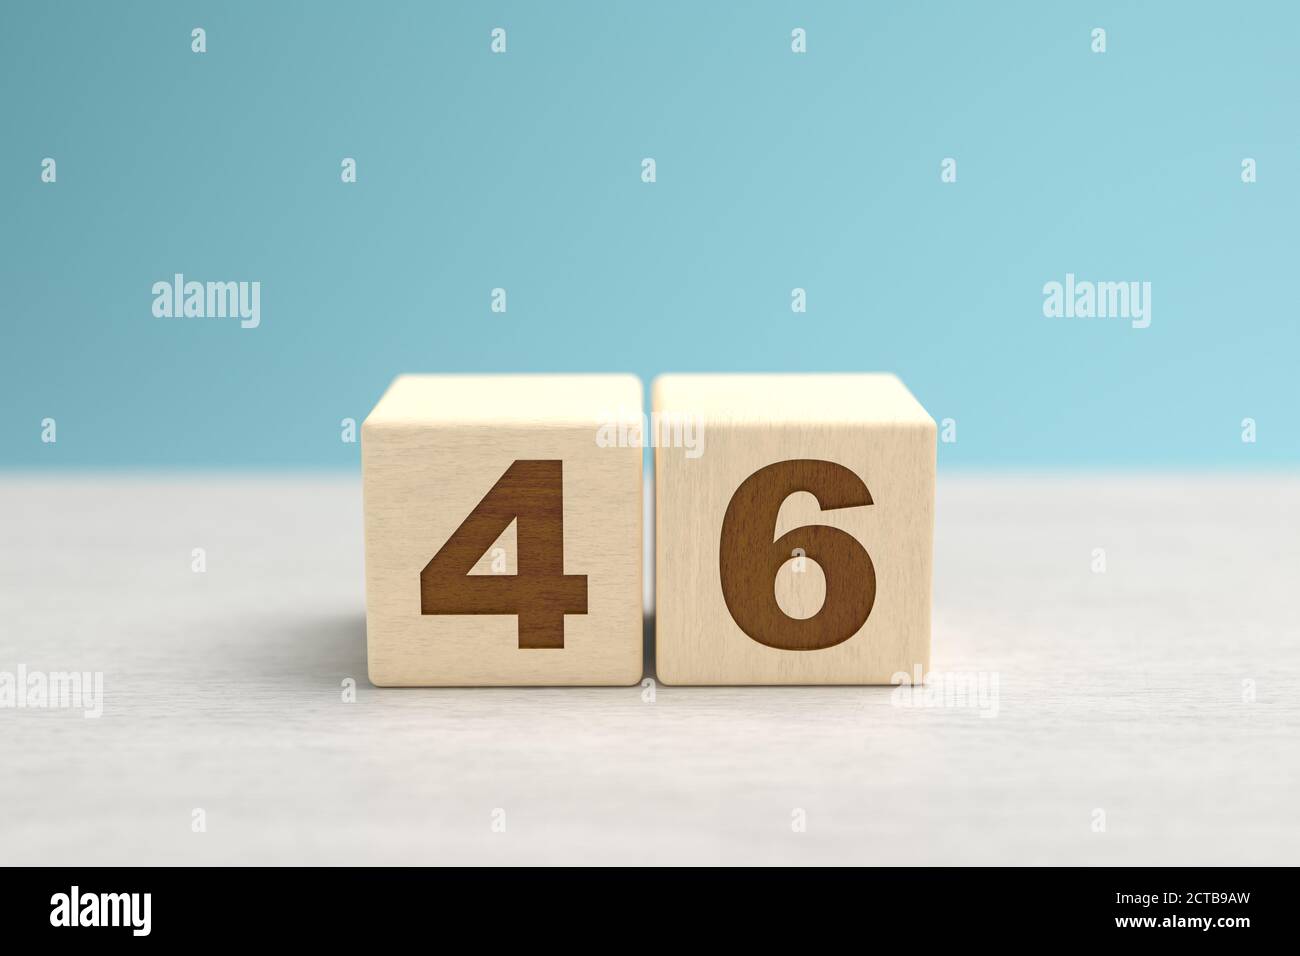 Wooden toy blocks forming the number 46. Stock Photo